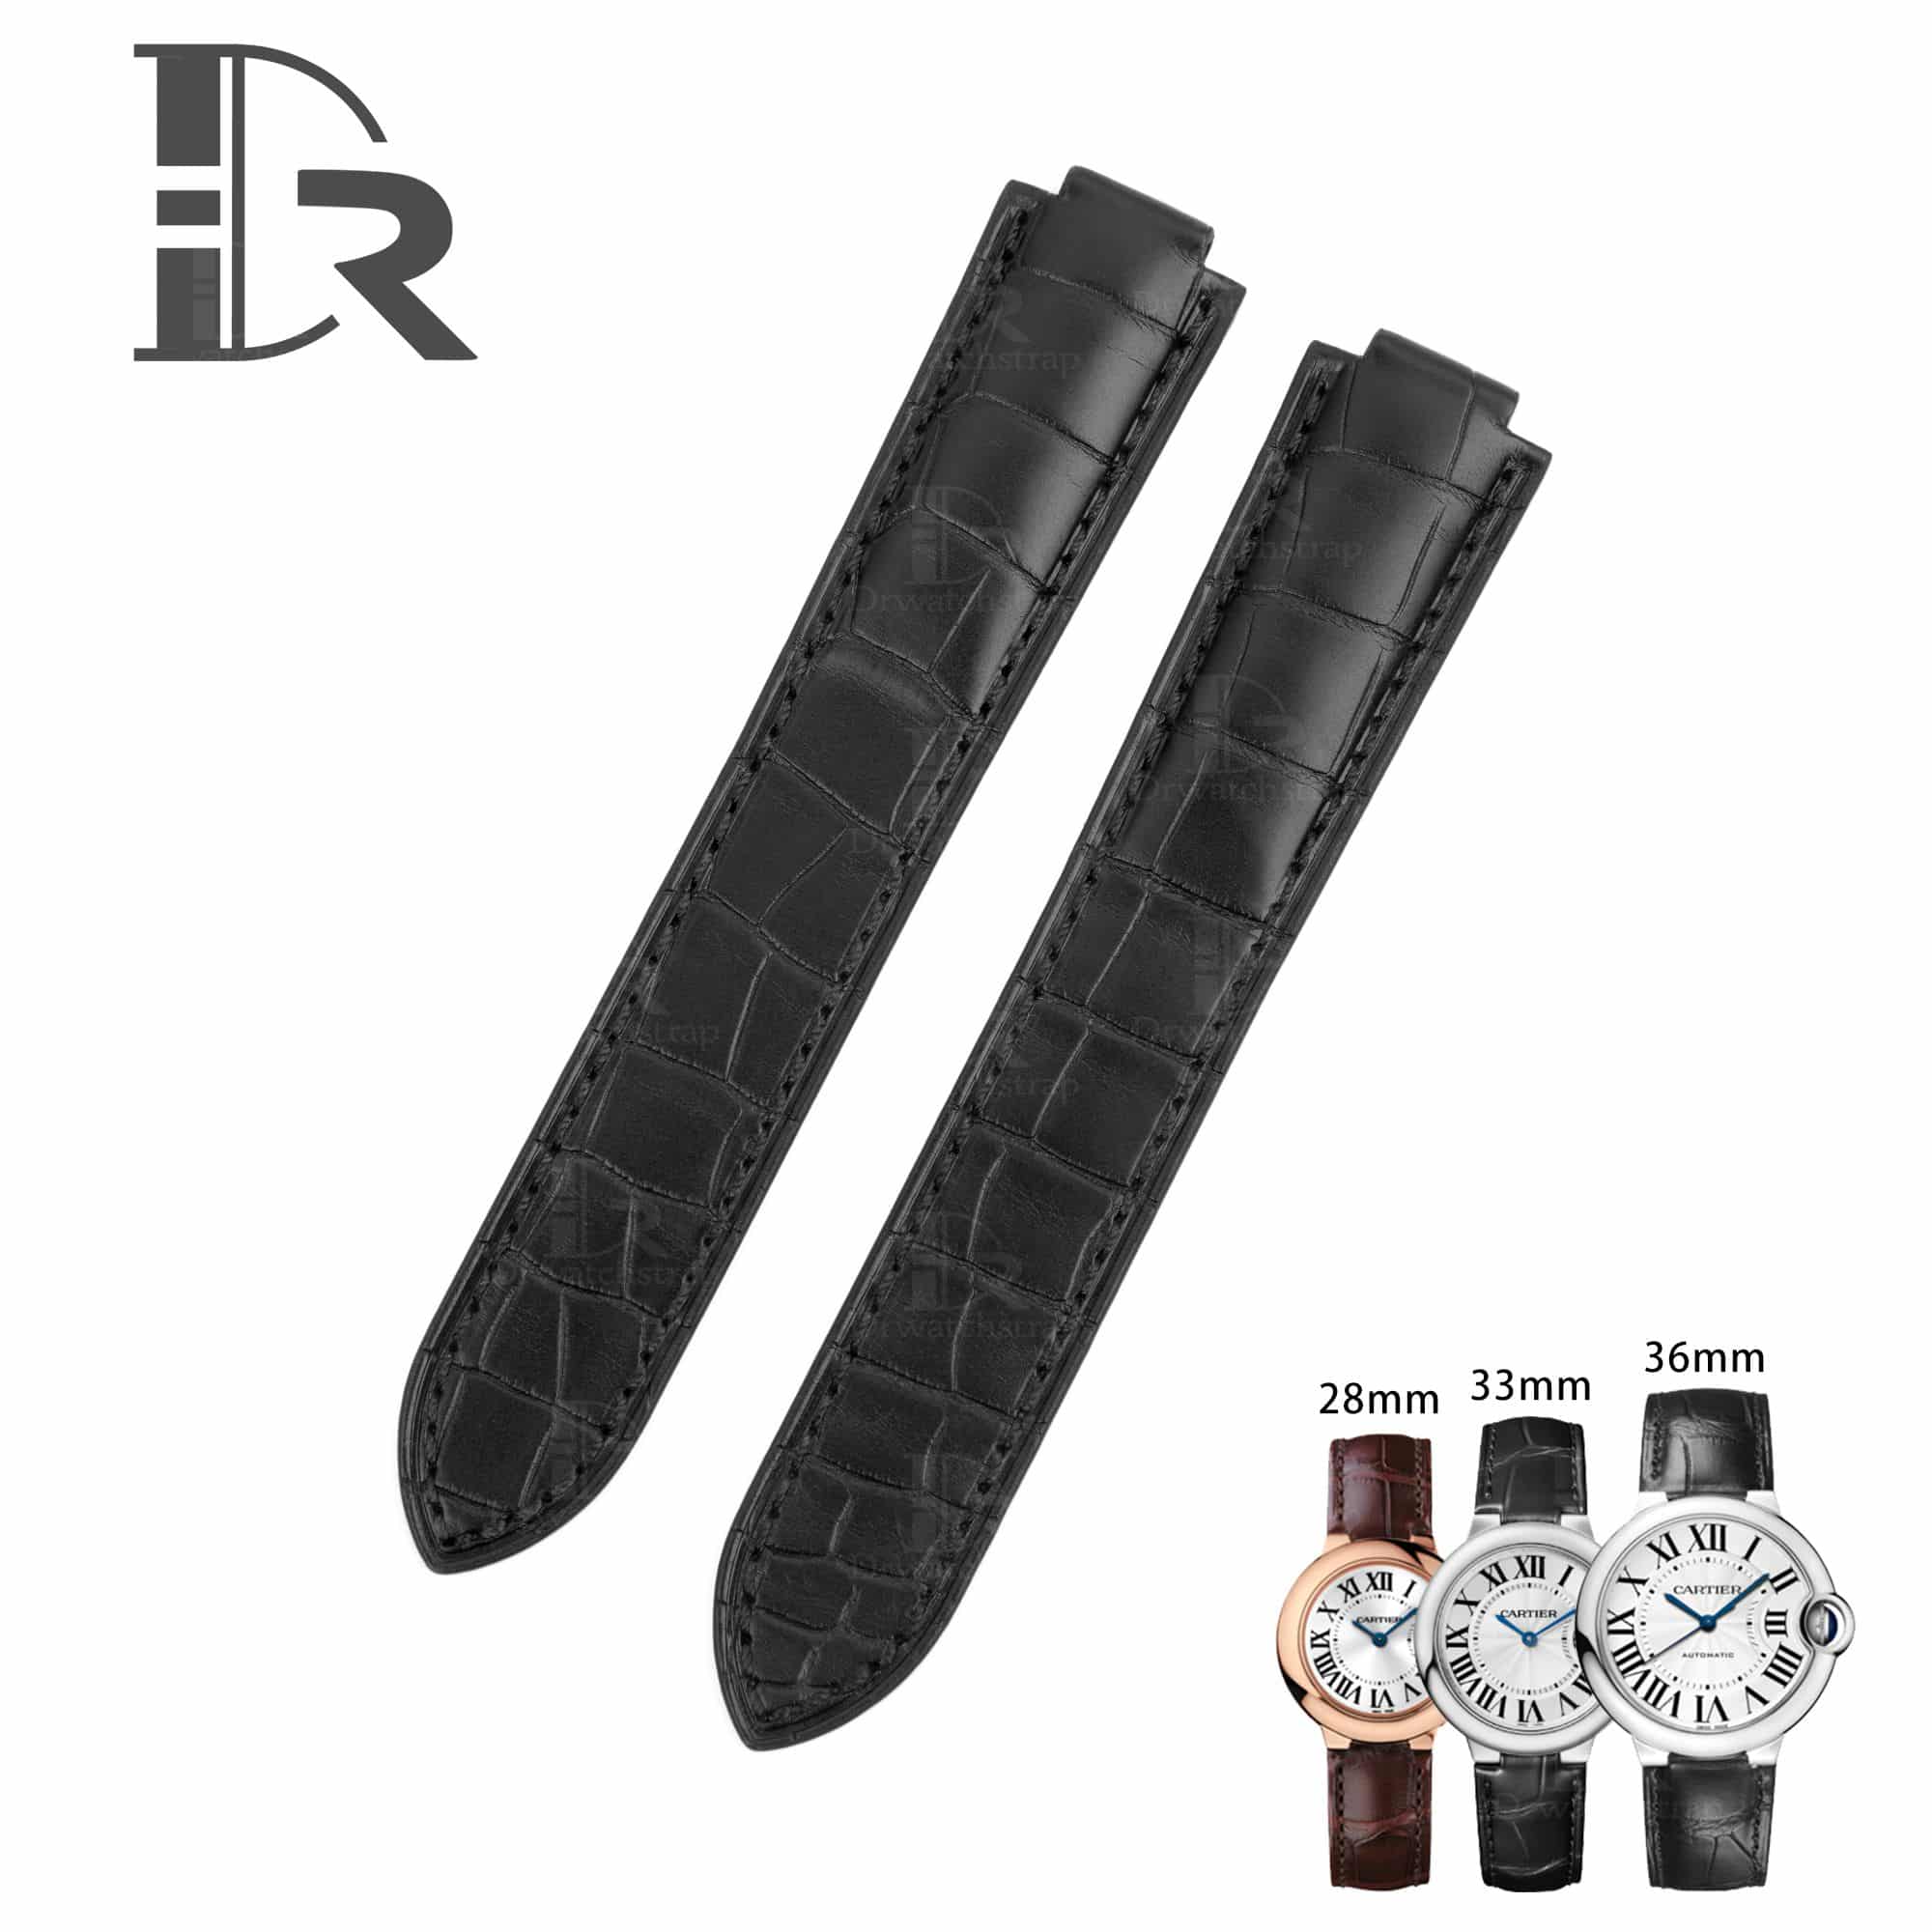 Replacement Cartier Ballon Bleu leather strap black replacement black blue pink brown watchbands for Cartier Ballon Bleu watches 33mm 36mm 42mm 43mm best quality straps online for sale